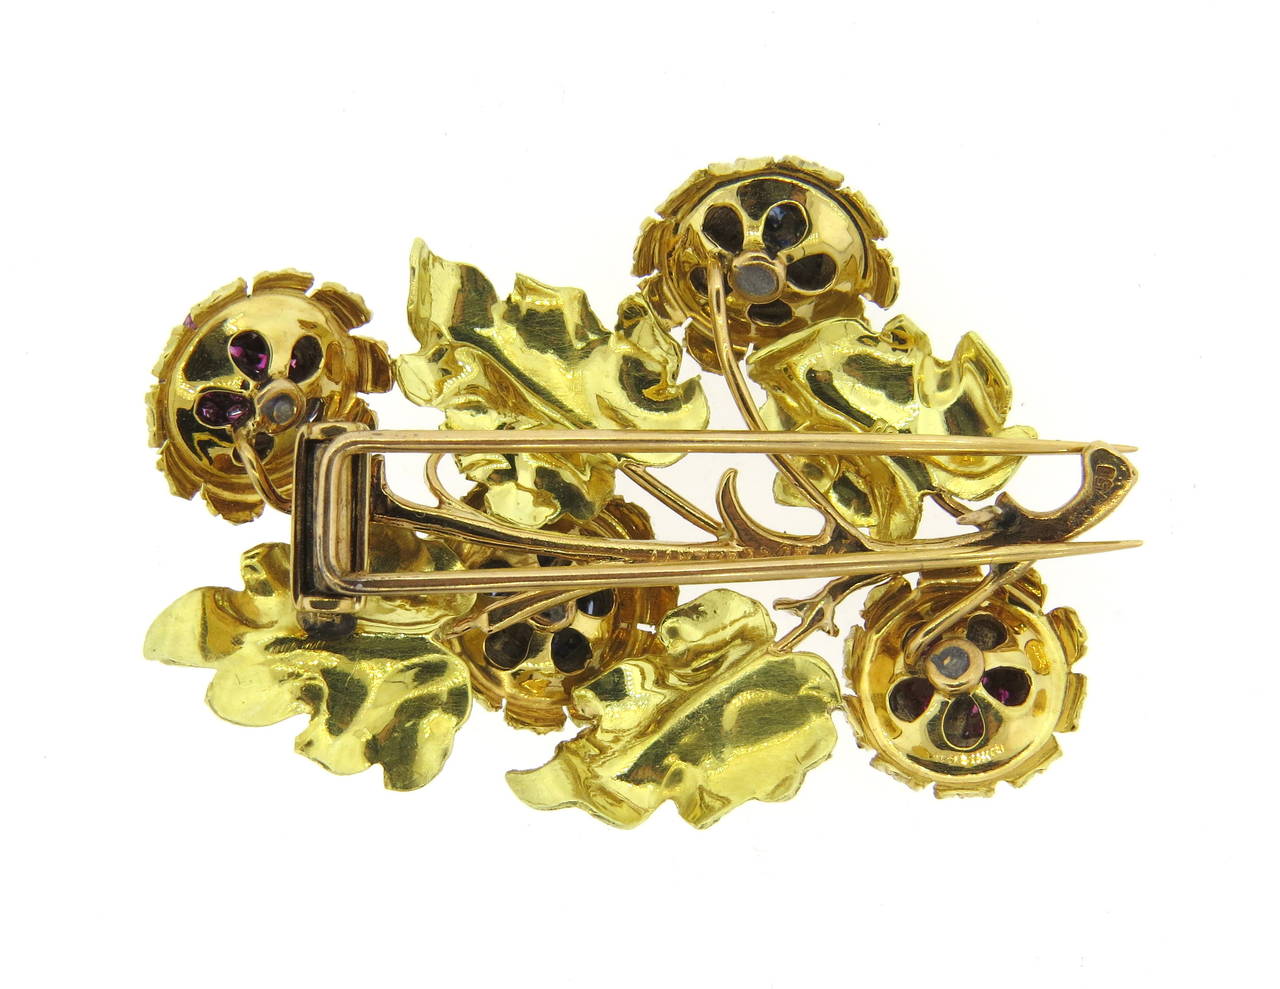 Mario Buccellati 18k gold brooch with sapphire and ruby flower, gold leaves. Brooch measures 51mm x 36mm. Marked M. Buccellati,750. weight - 20gr